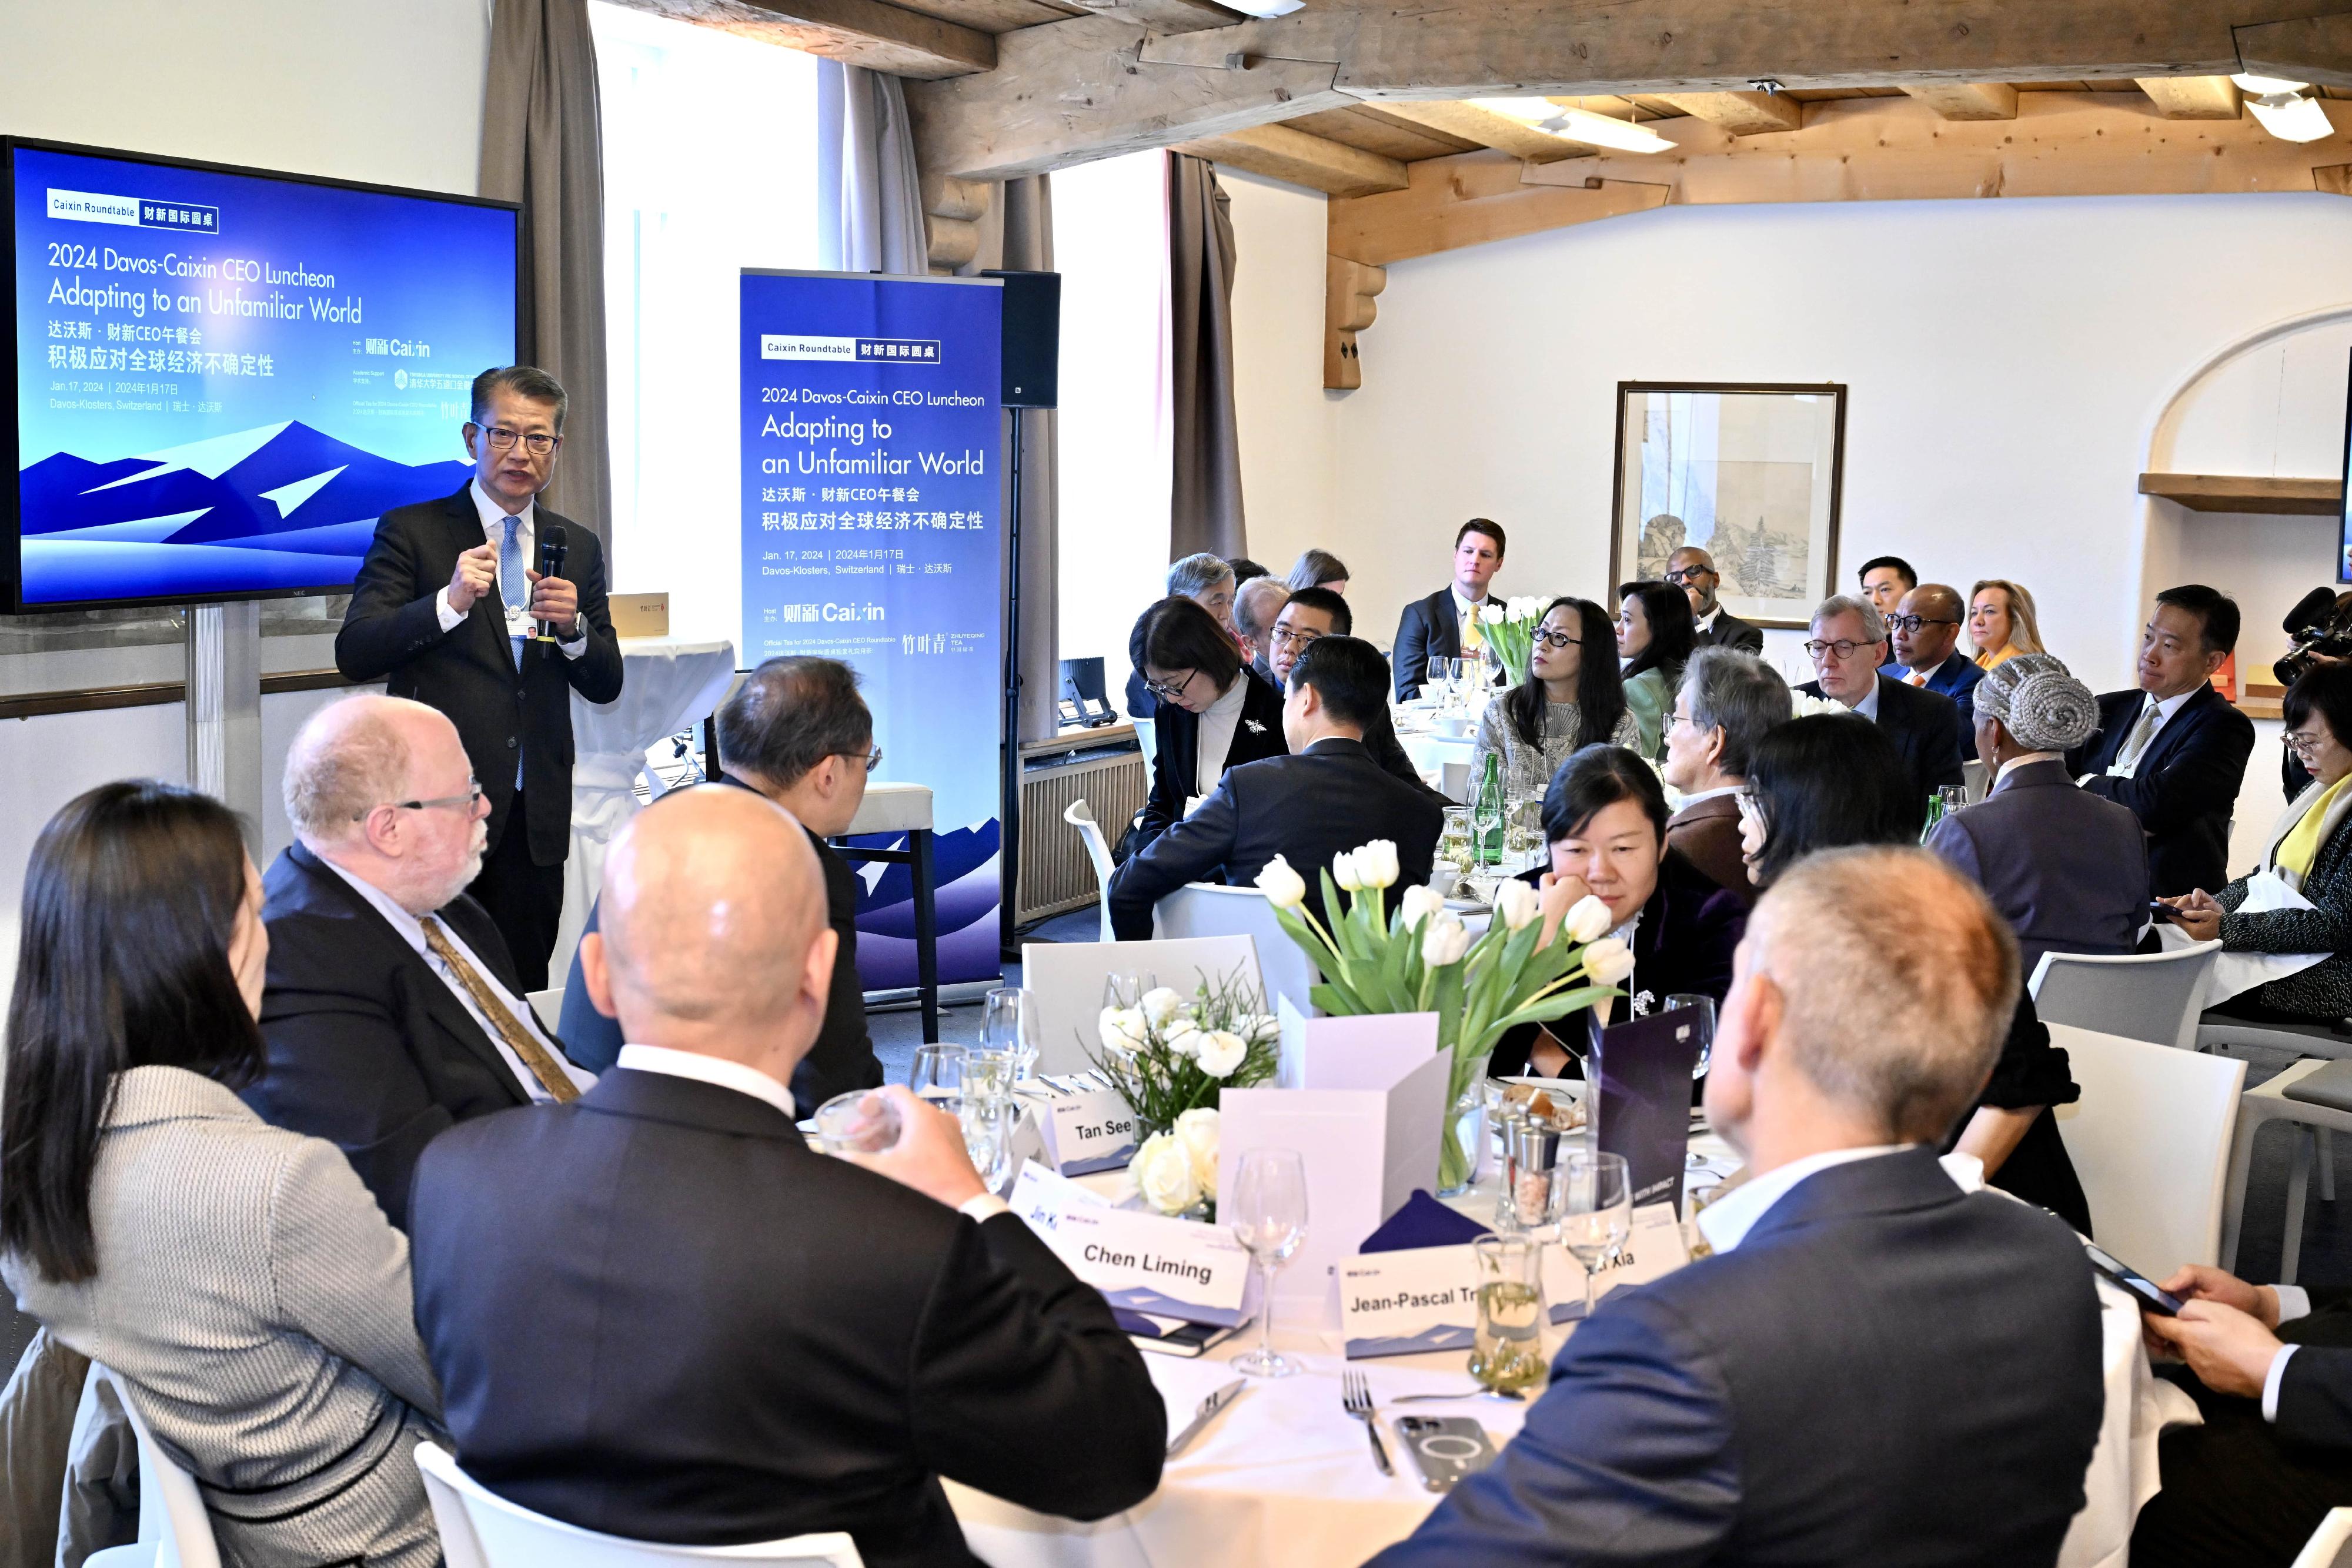 The Financial Secretary, Mr Paul Chan, continued to attend the World Economic Forum Annual Meeting at Davos, Switzerland, yesterday (January 17, Davos time). Photo shows Mr Chan giving a speech at the Caixin CEO Luncheon.